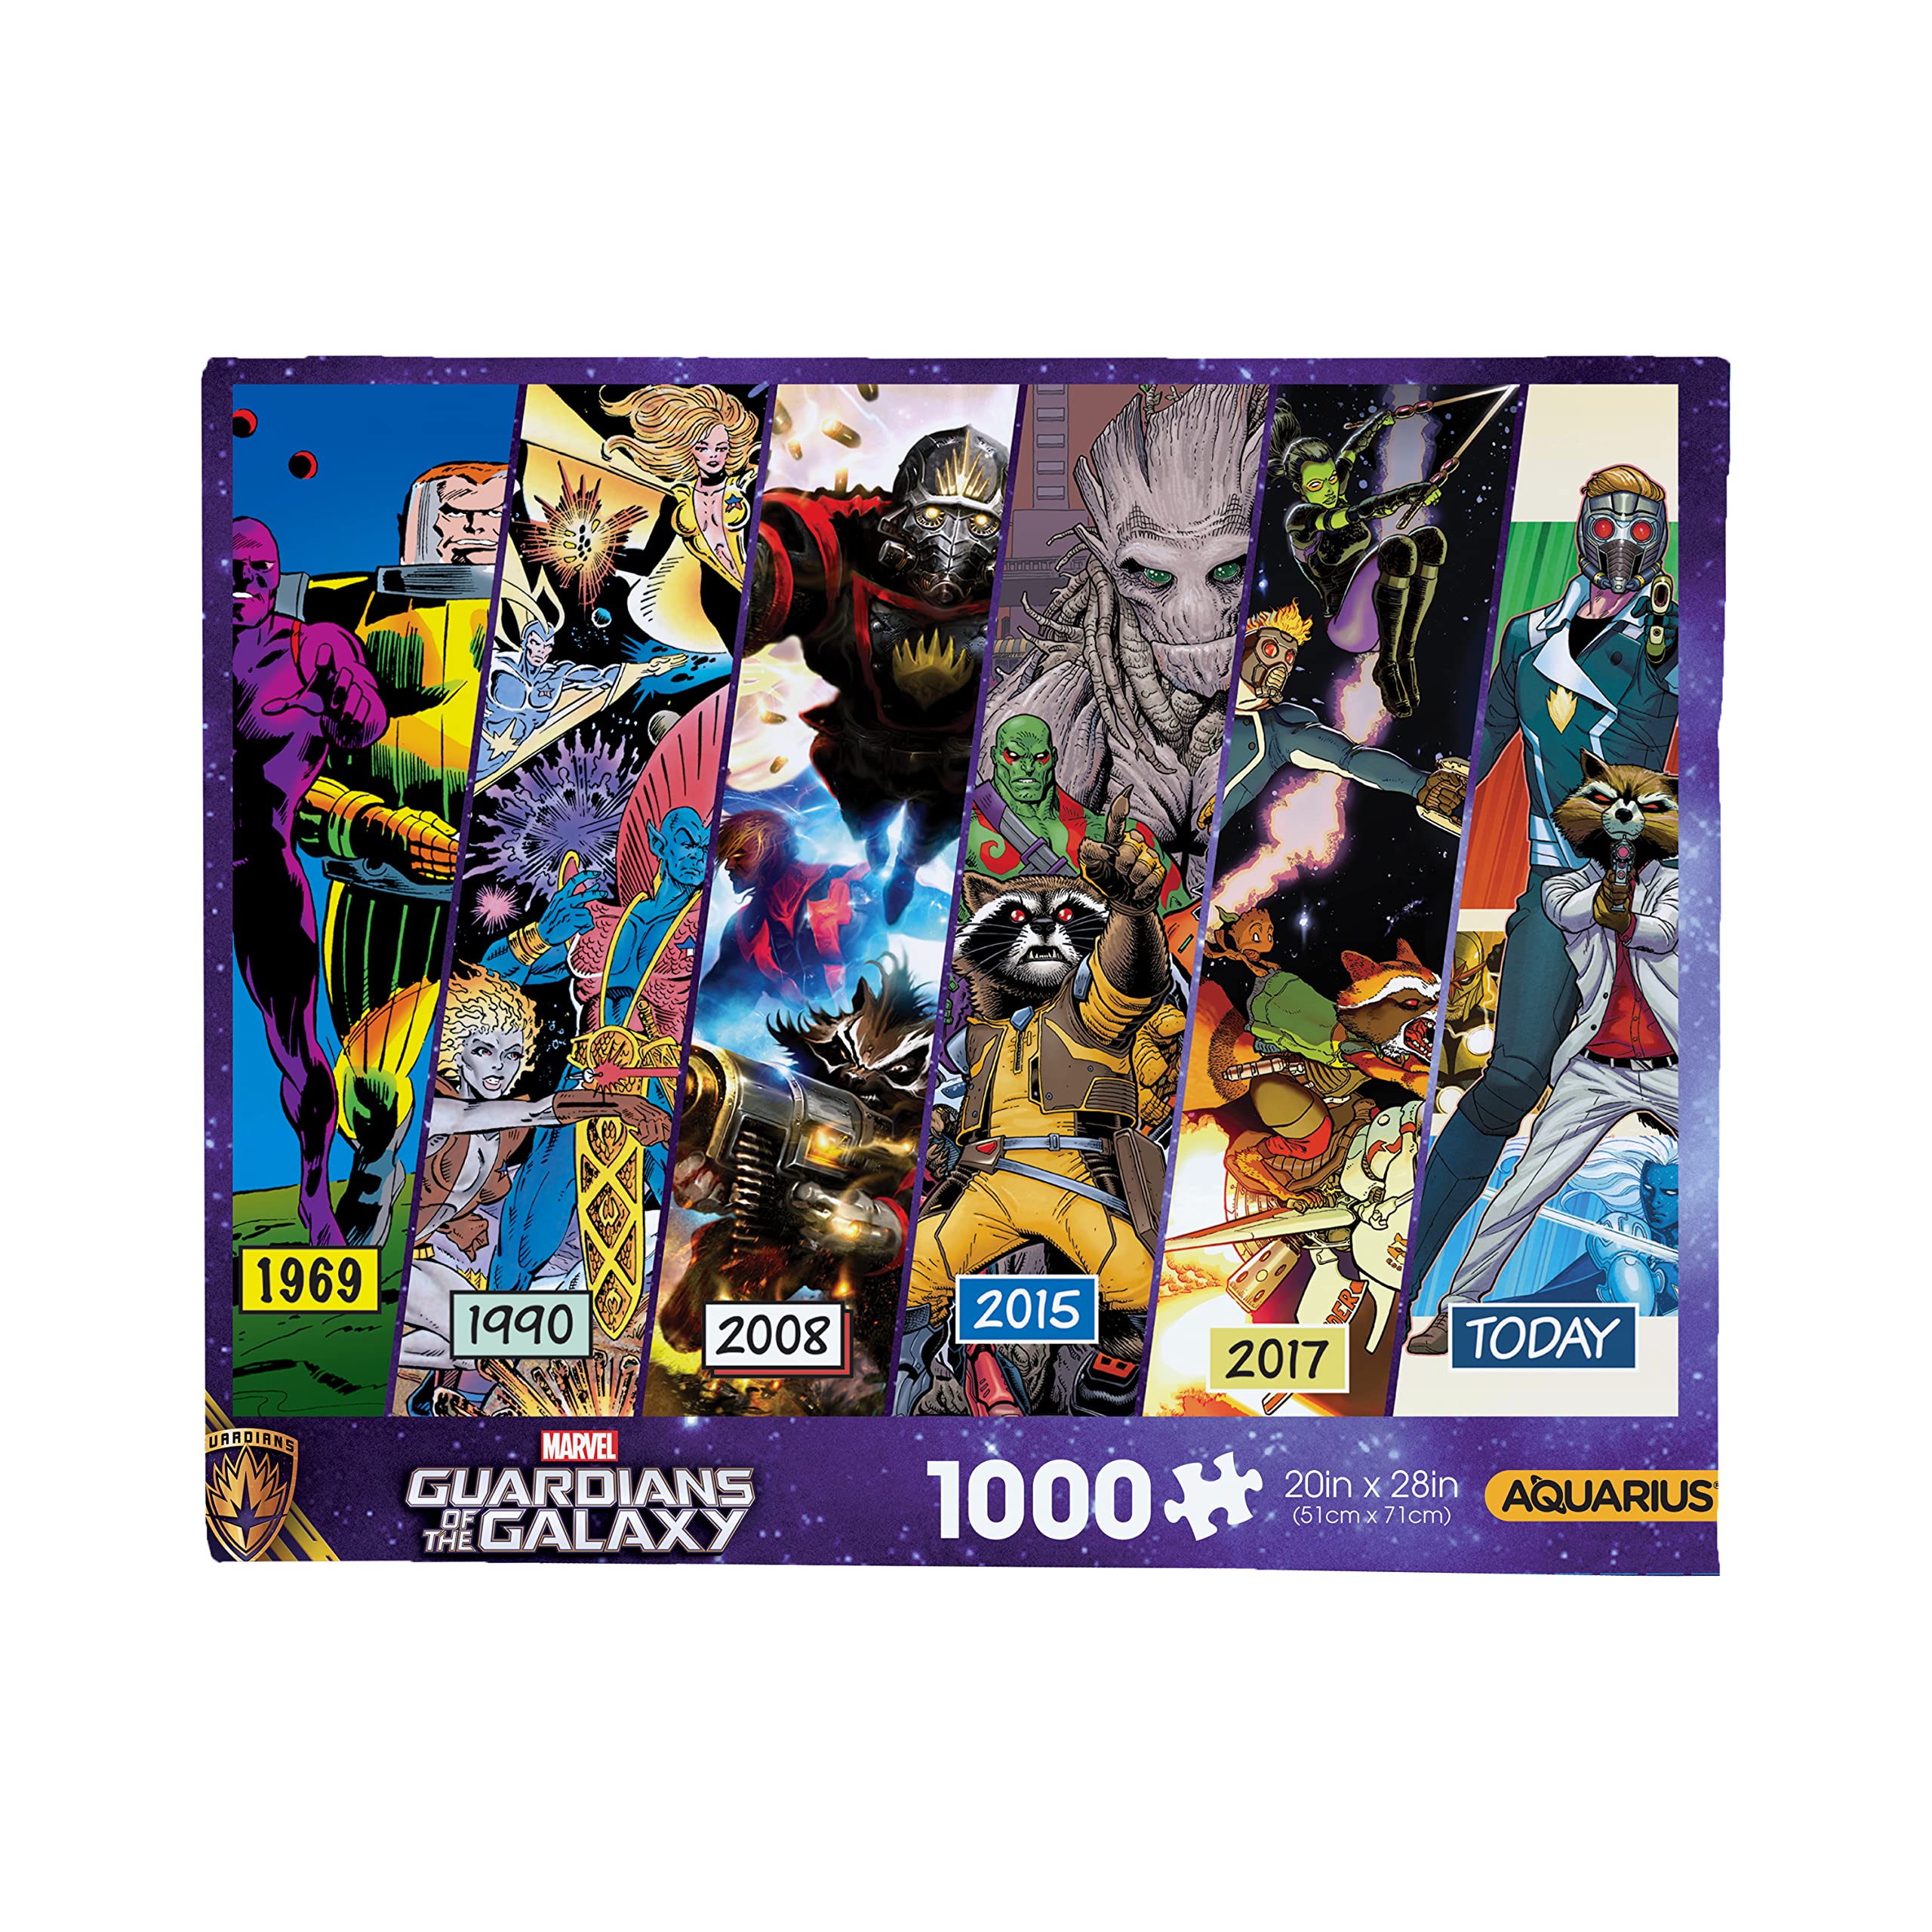 1000-Piece AQUARIUS Guardians of The Galaxy Timeline Puzzle $4.71 + Free Shipping w/ Prime or on orders over $35